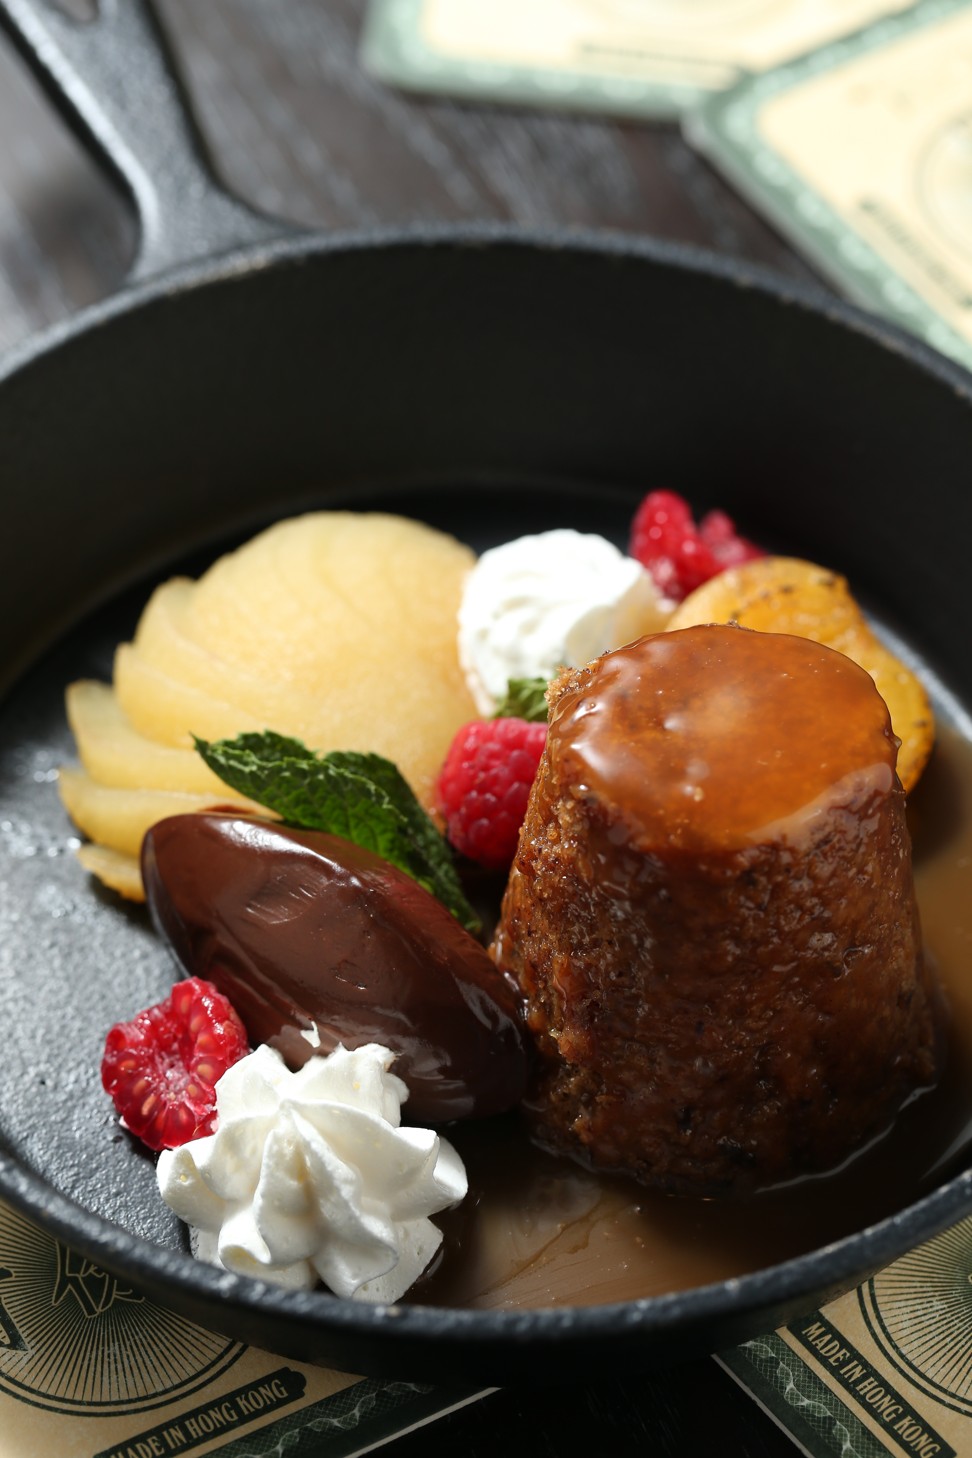 Dickens Bar’s toffee date pudding